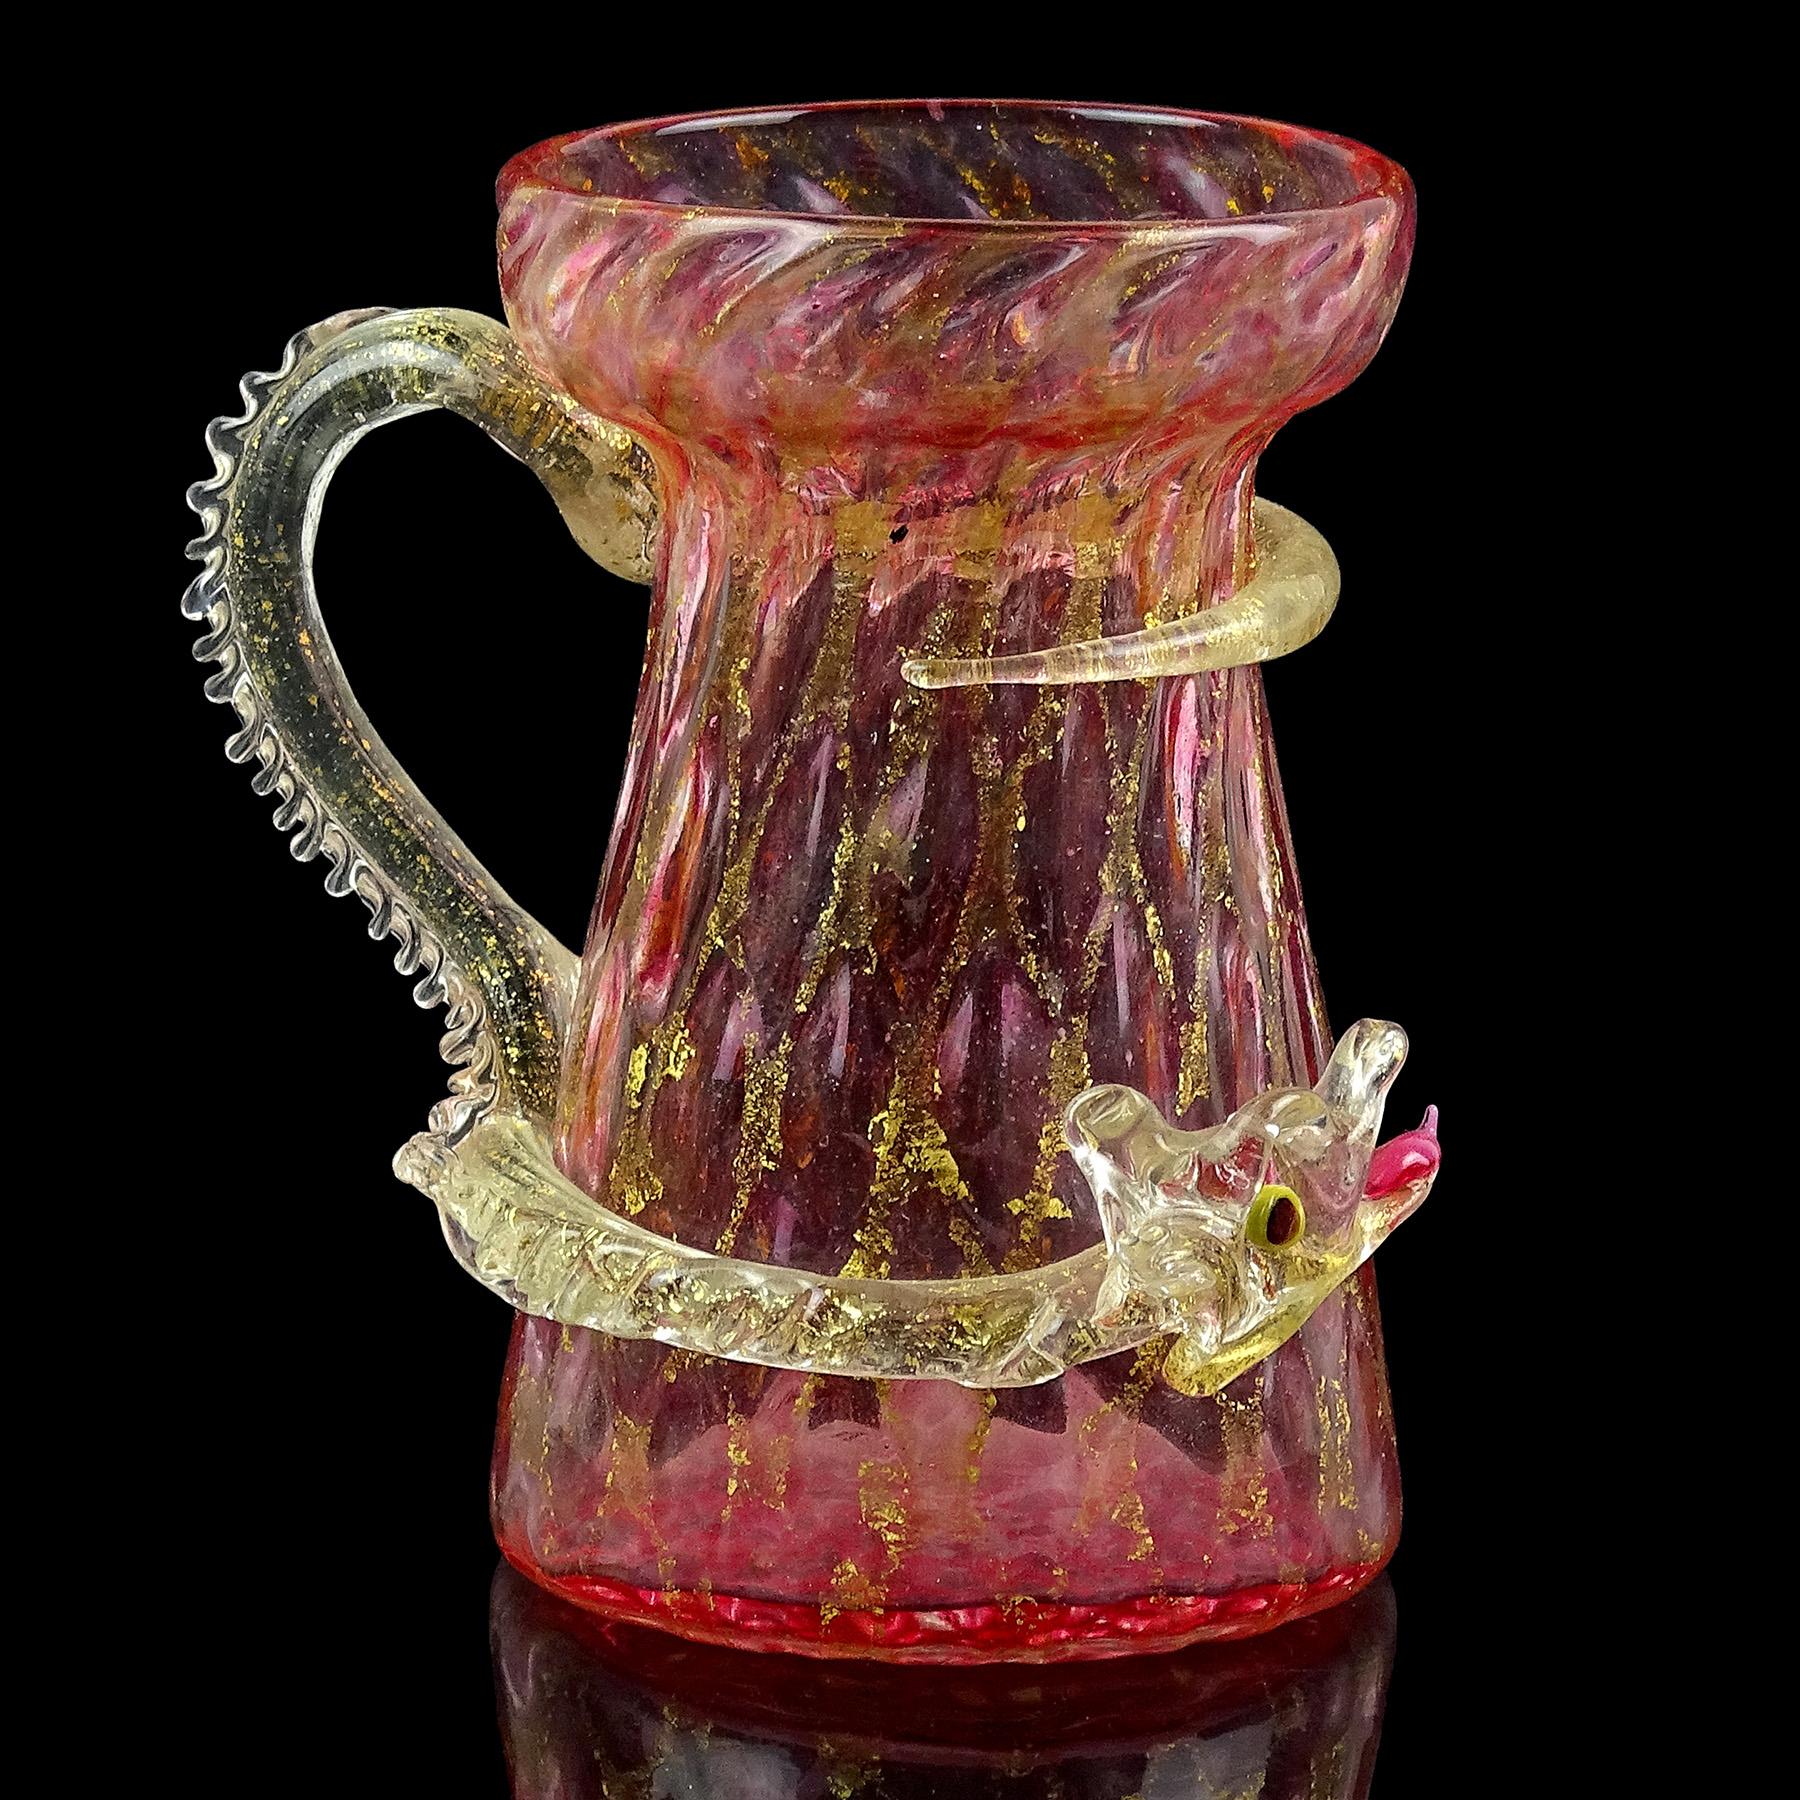 Beautiful, rare antique early Venetian pink with gold leaf Italian art glass sea serpent or dragon mini vase. The piece is attributed to the Salviati Dott. Company, mid-1800s. The surface has a quilted diamond pattern that is a little bit raised, so